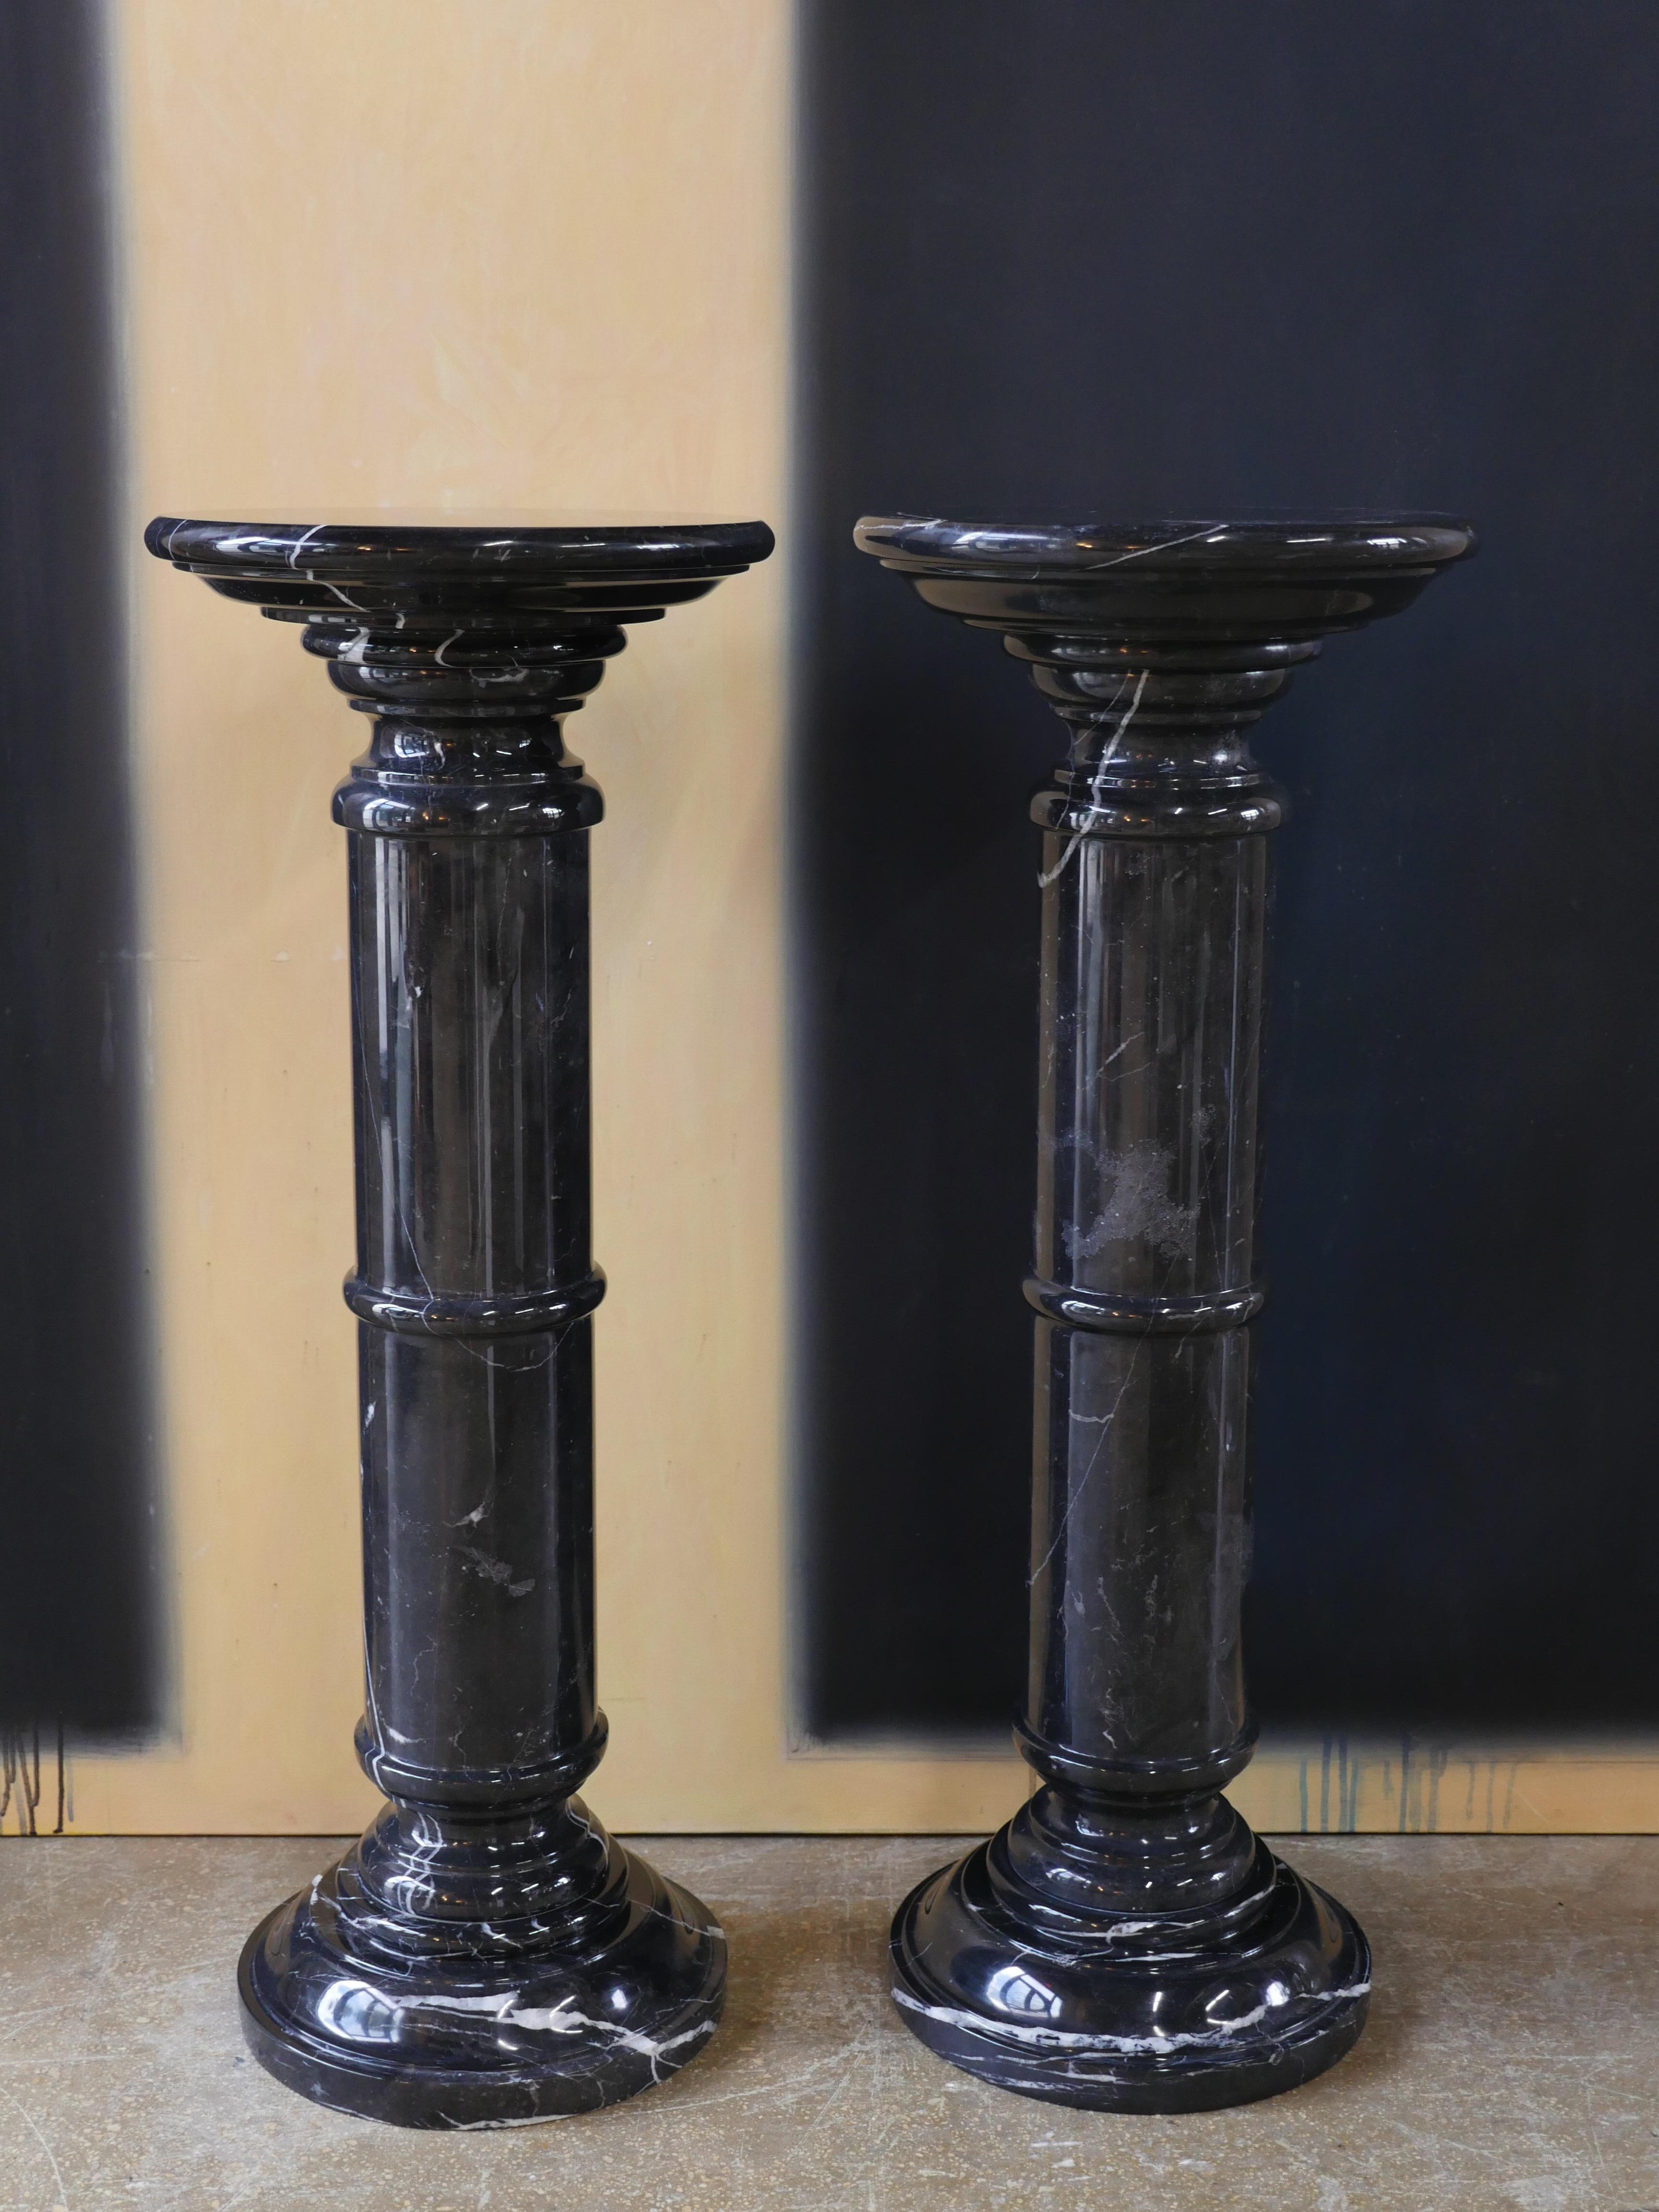 1970s Polished Nero Marquina Solid Marble Pedestals - Set of 2 For Sale 3